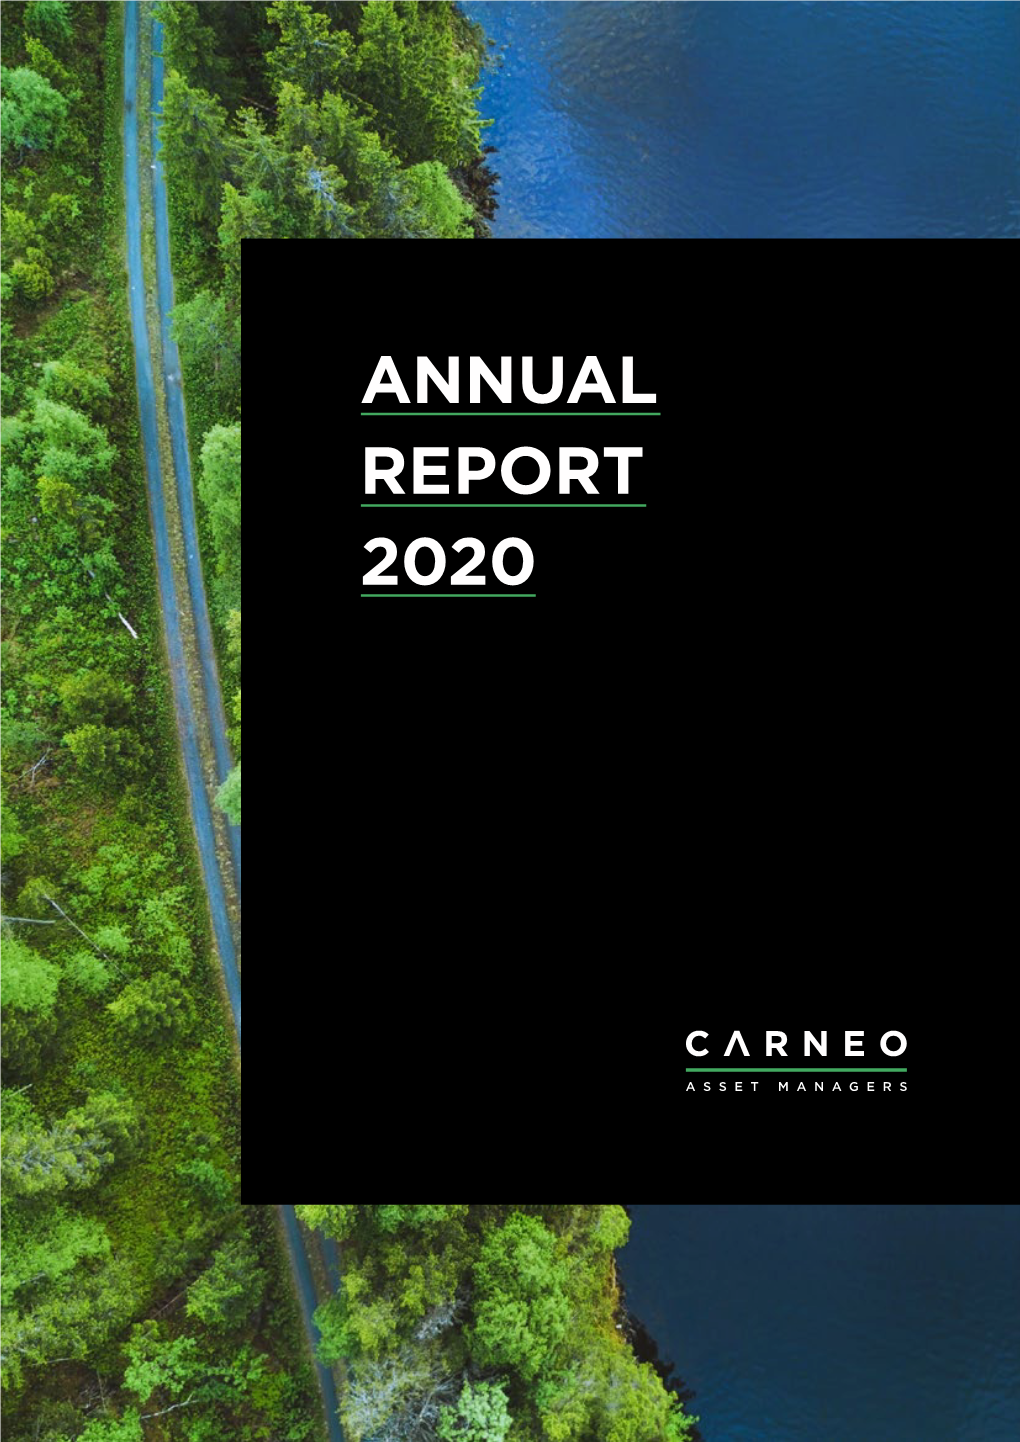 Carneo Annual Report 2020 1 the Largest Independent Asset Management Group in the Nordic Region